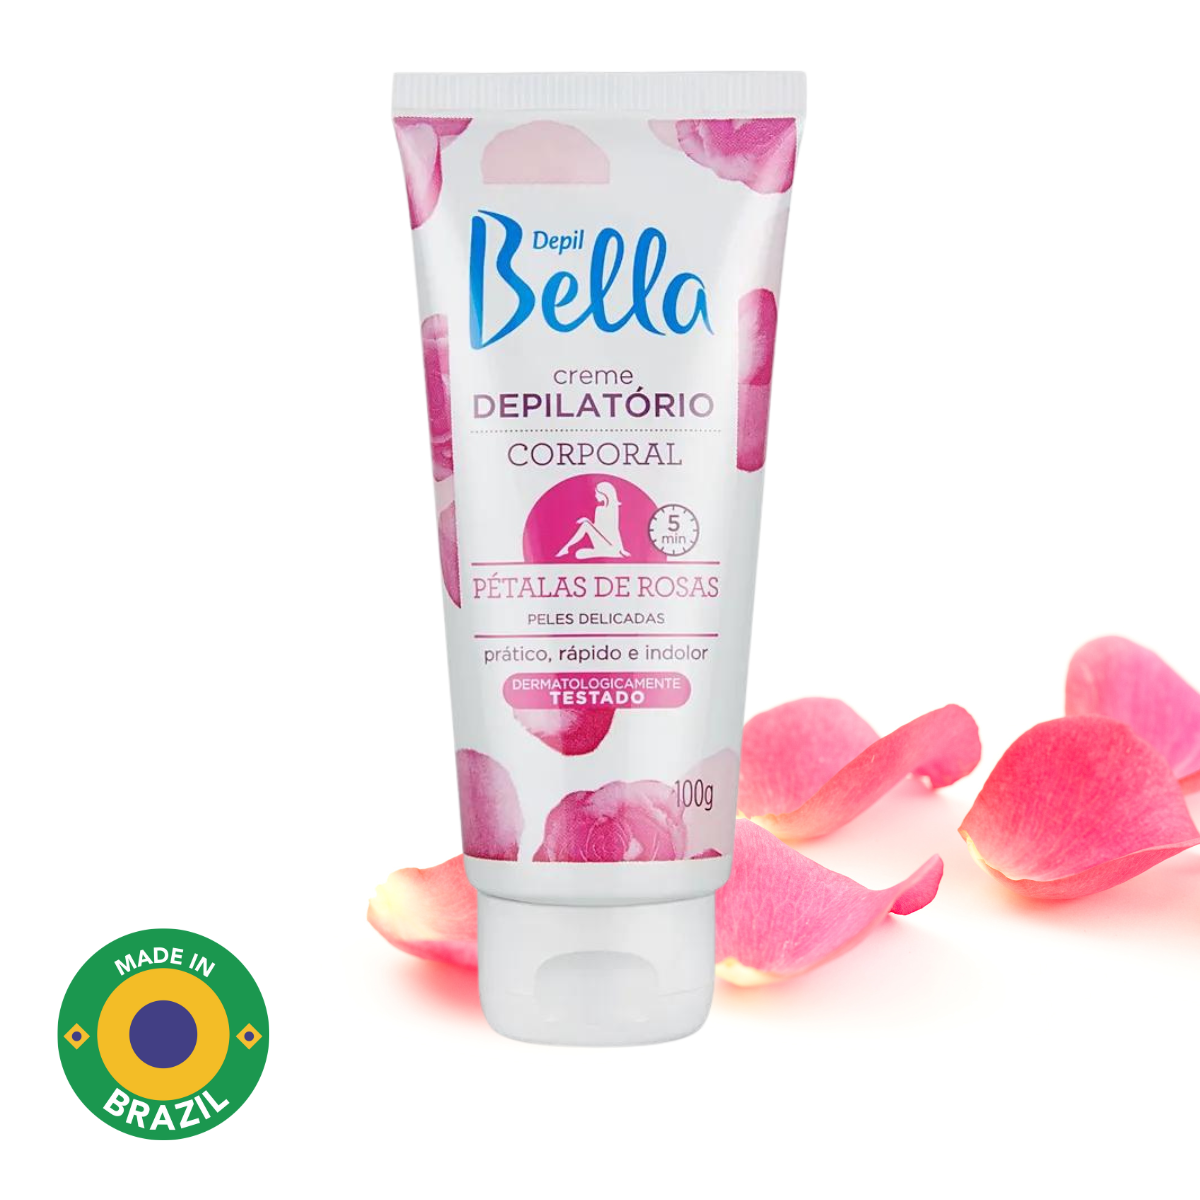 Depil Bella Rose Petals Body Hair Removal Cream – With Argan Oil and Shea Butter, Quick and Gentle Formula for Delicate Skin, 100g